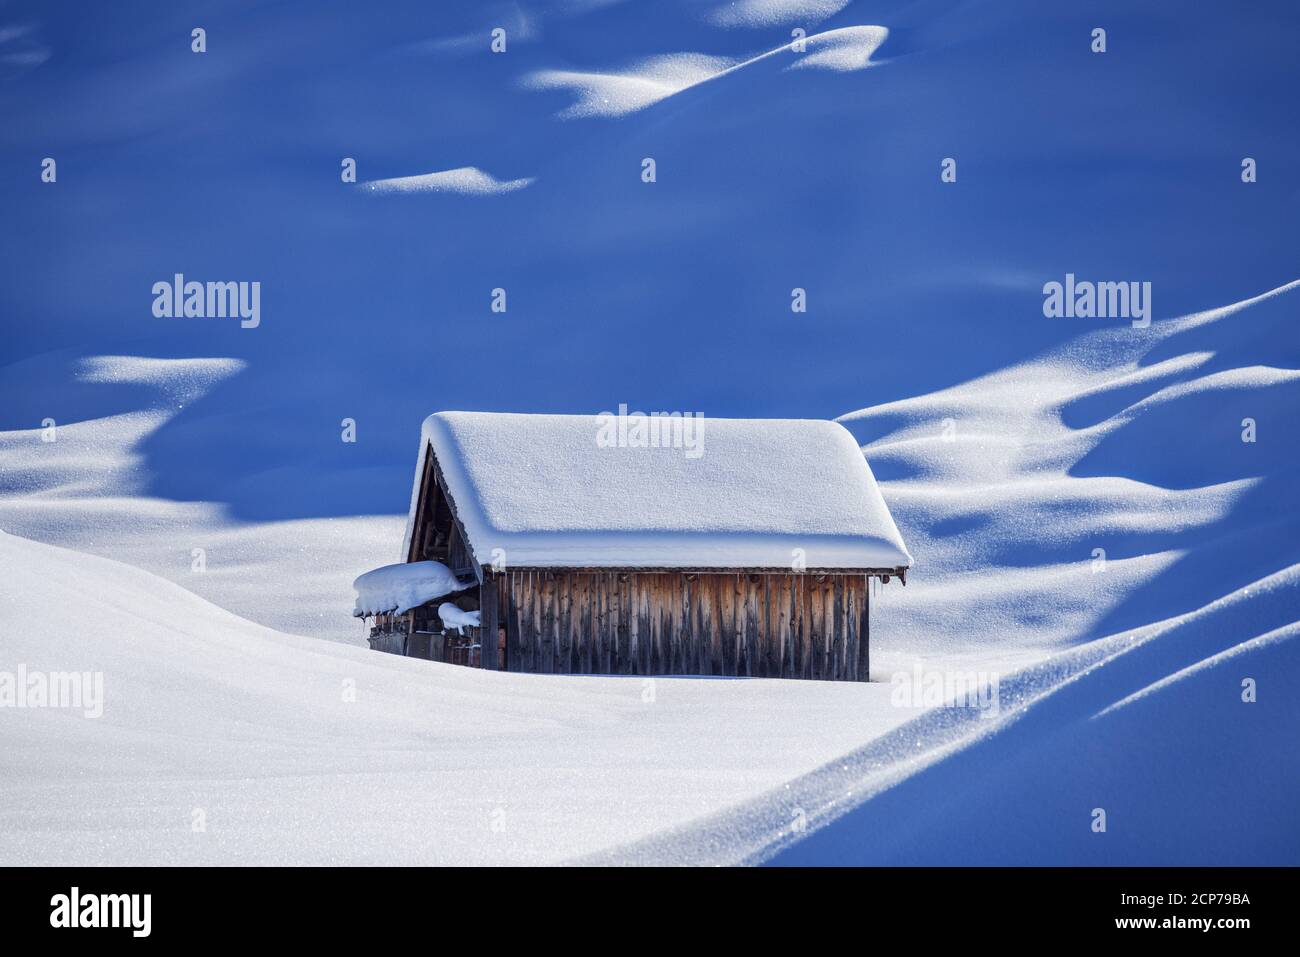 Snow-covered hut in front of the humpback meadows, Mittenwald, Werdenfelser Land, Upper Bavaria, Bavaria, Southern Germany, Germany, Europe Stock Photo